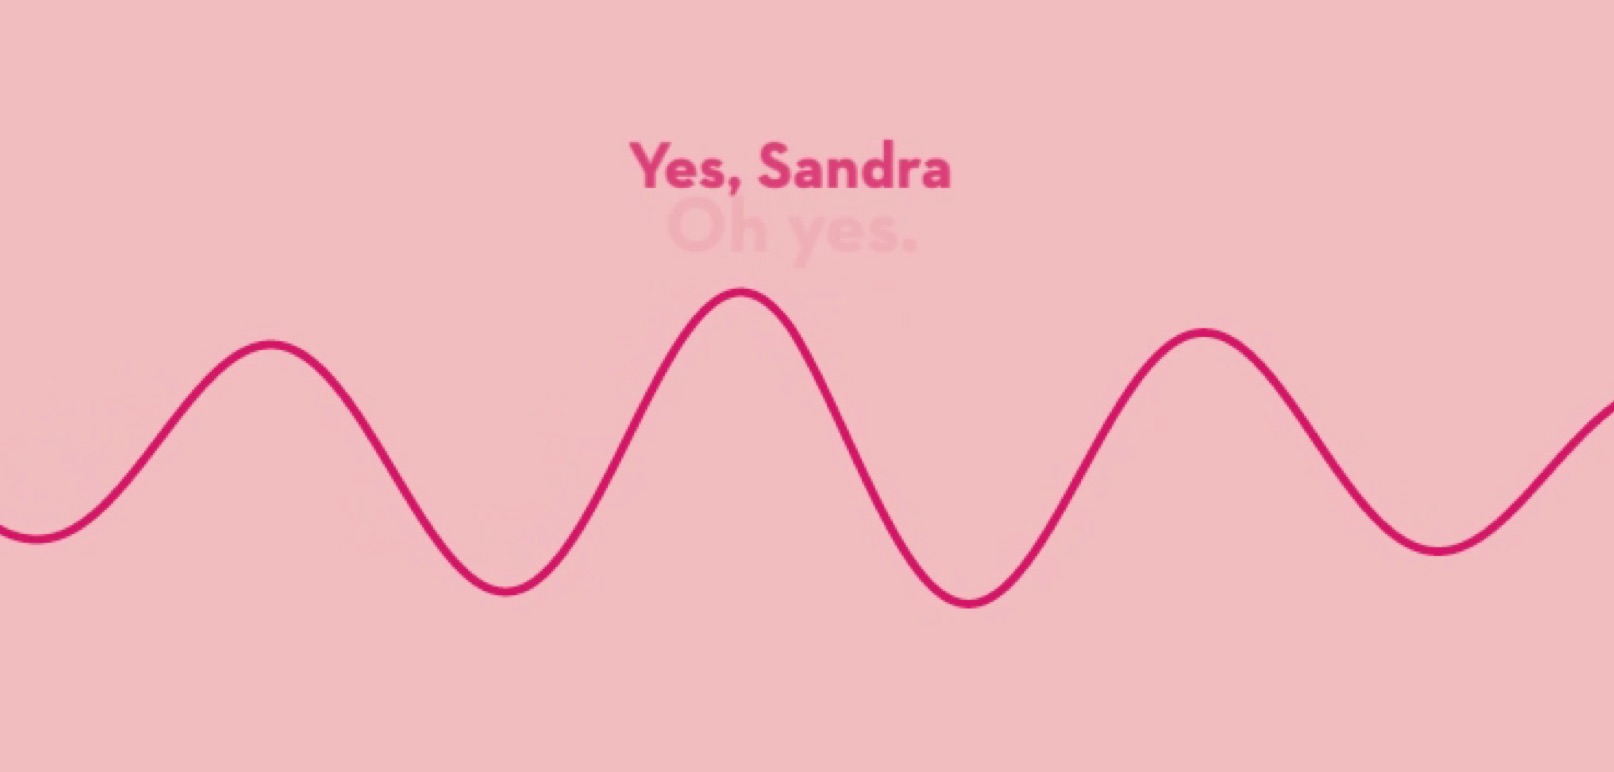 The sine wave saying \'Yes, Sandra. Oh yes.\'